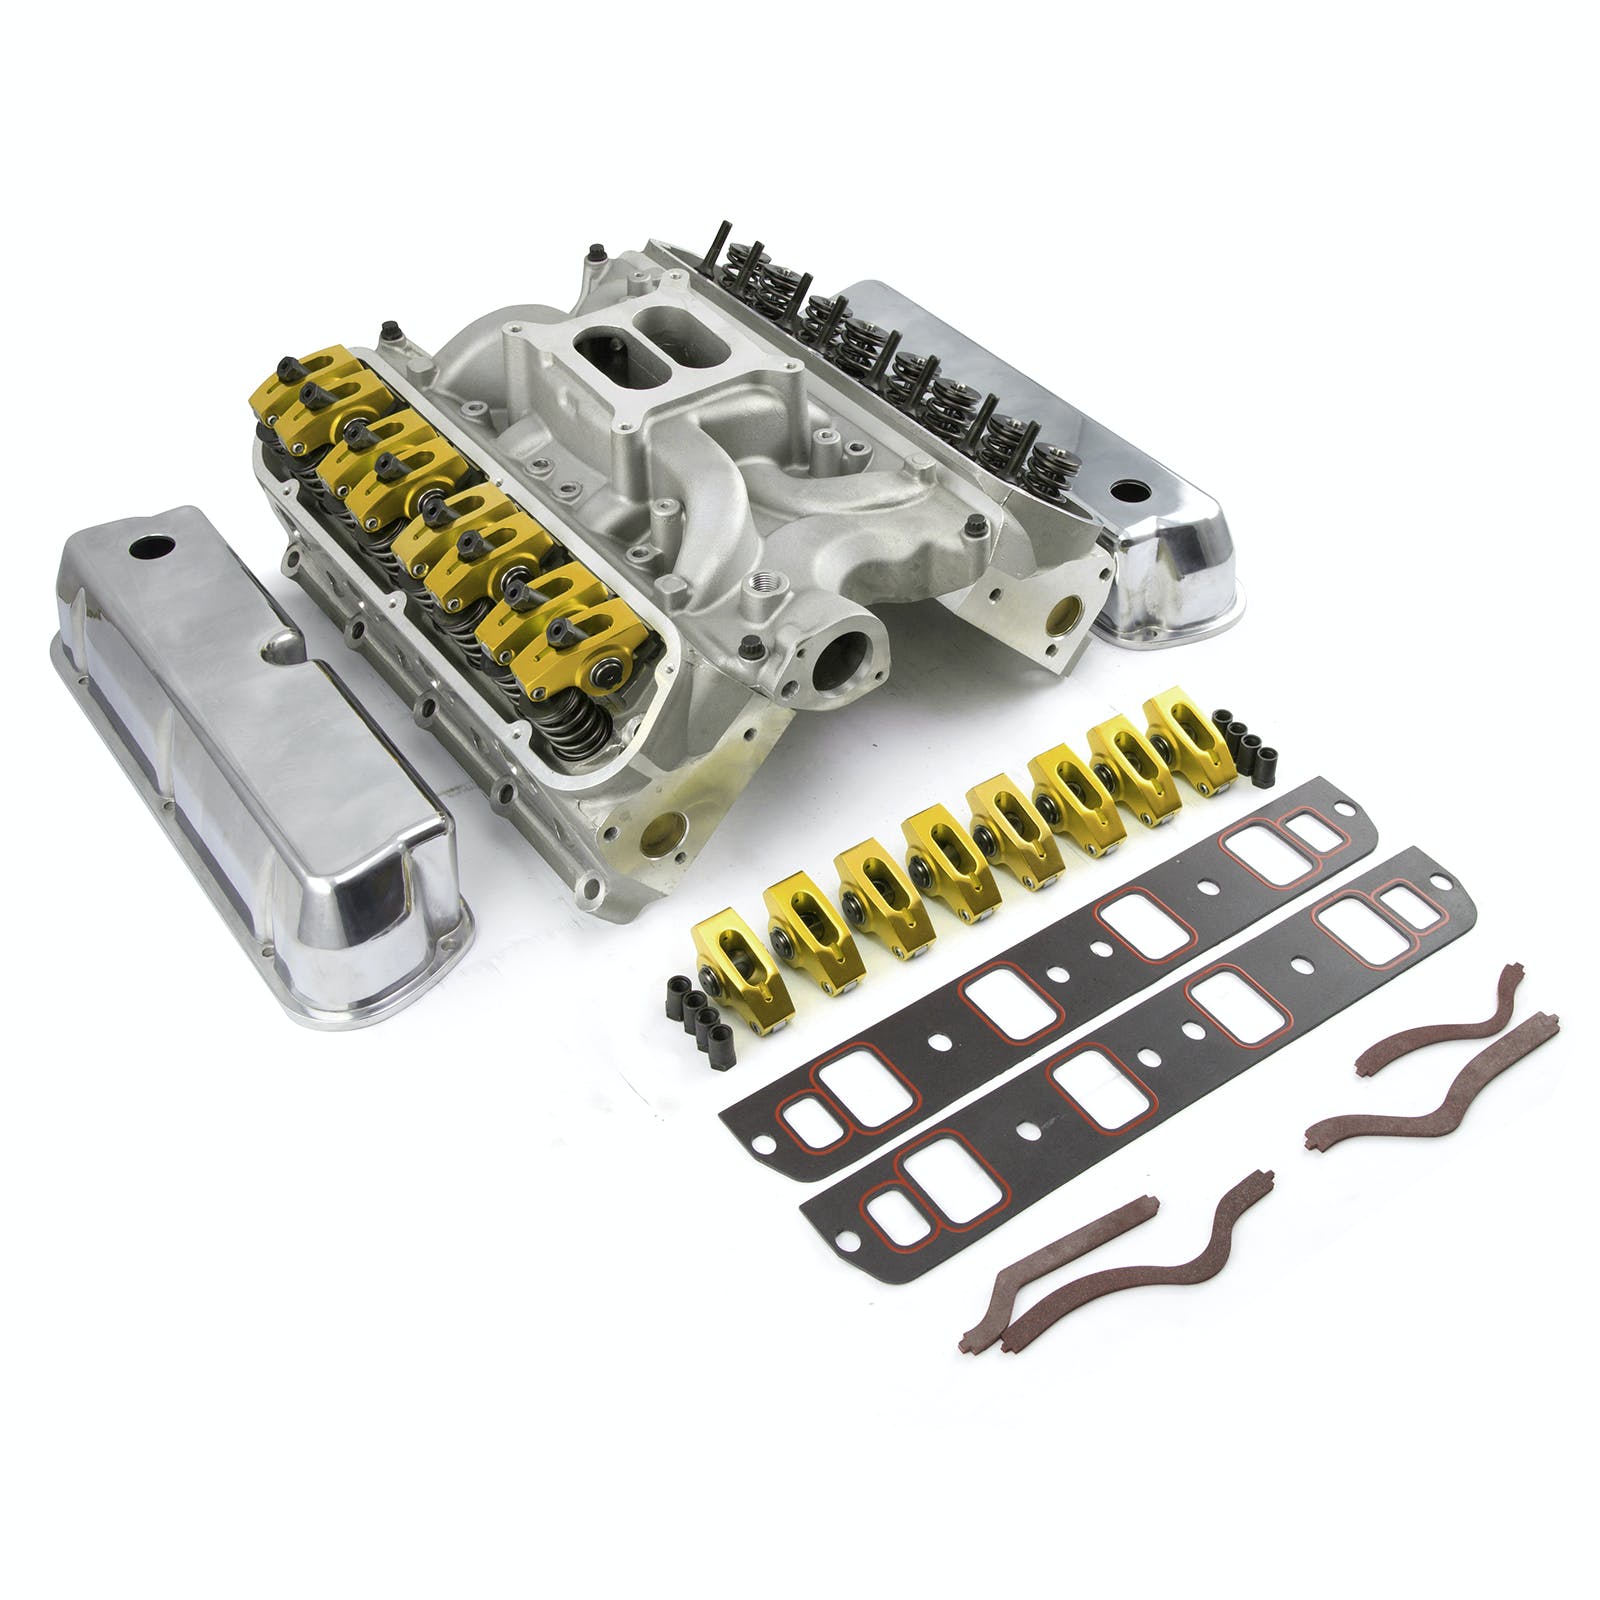 Speedmaster PCE435.1025 Hyd FT 210cc Cylinder Head Top End Engine Combo Kit